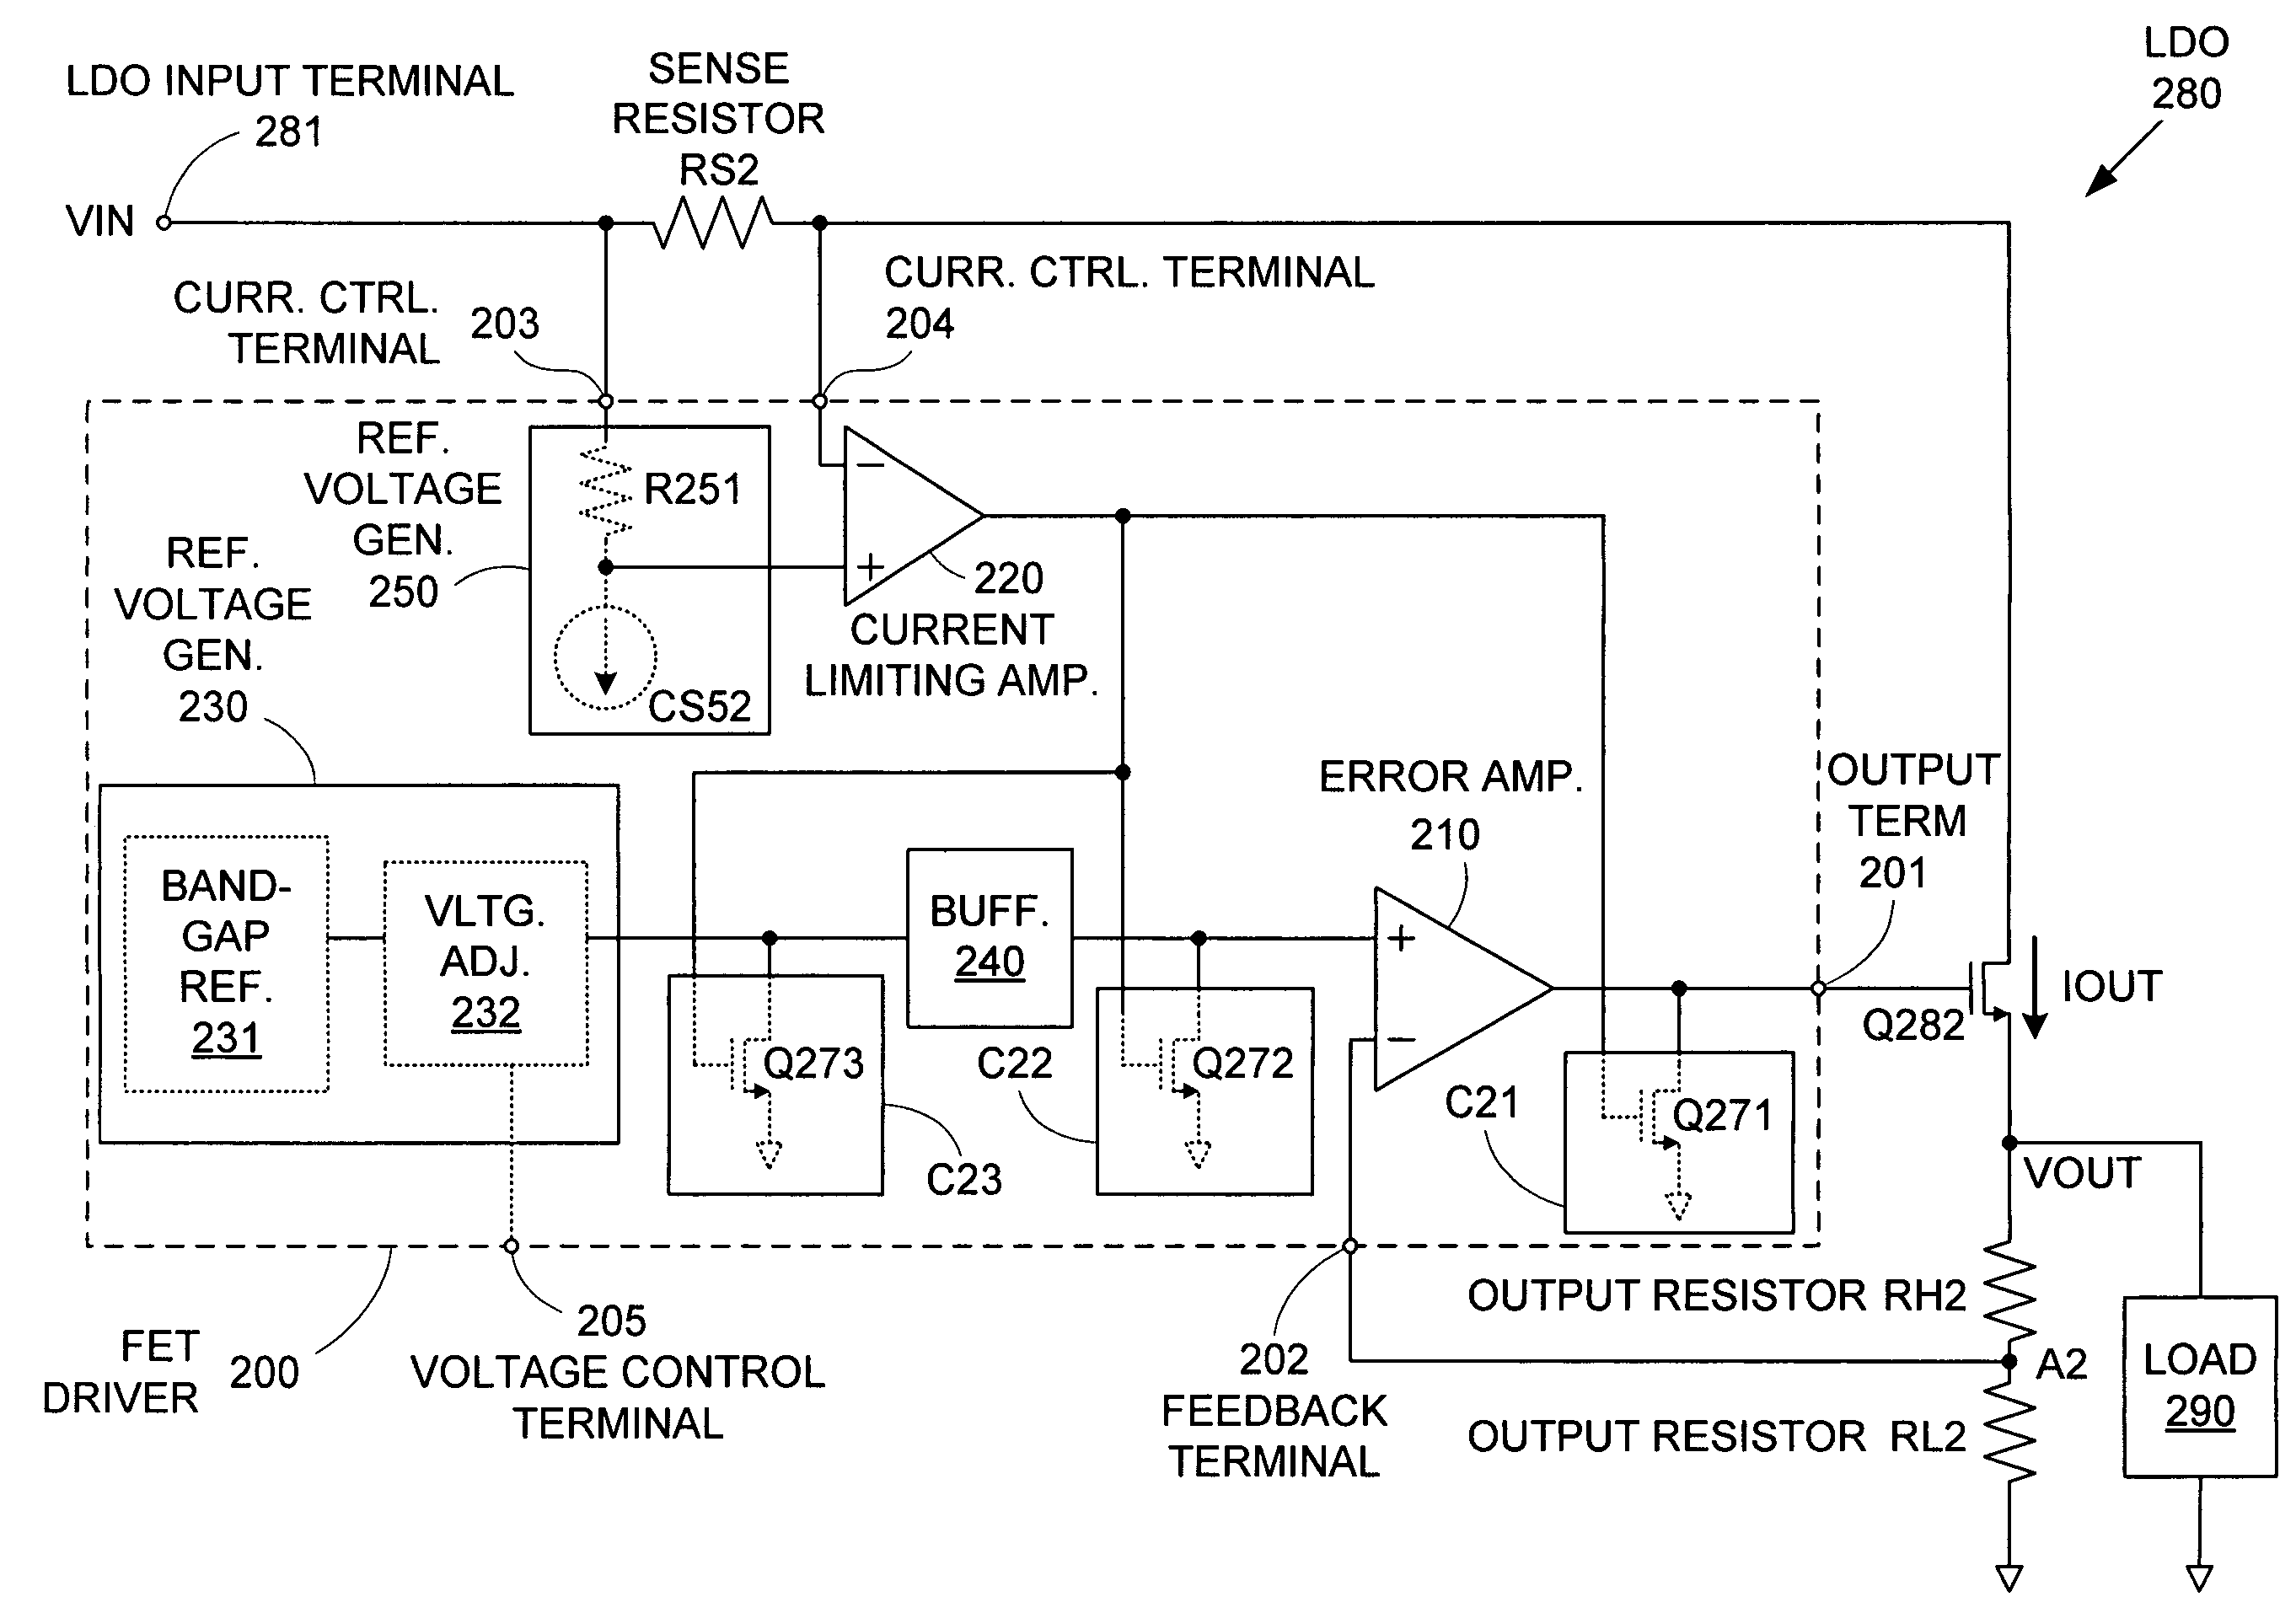 Current-limiting circuitry